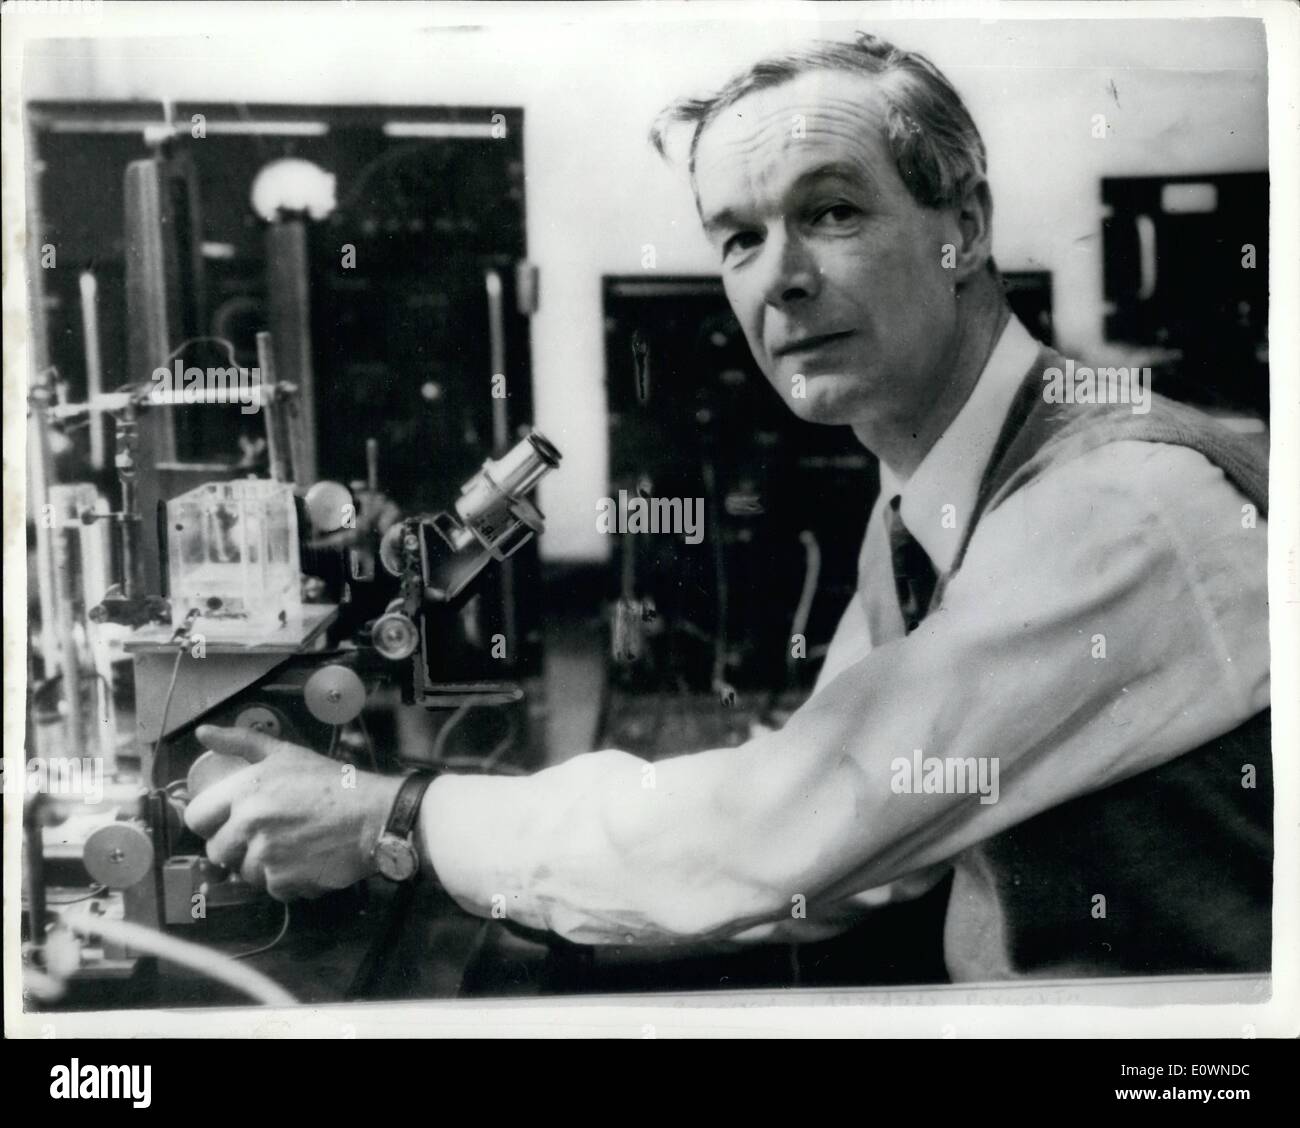 Oct. 10, 1963 - Nobel Prize for Professor Hodgkin. The 1963 Nobel Prize for Medicine has been awarded jointly to Professor Alan Stock Photo